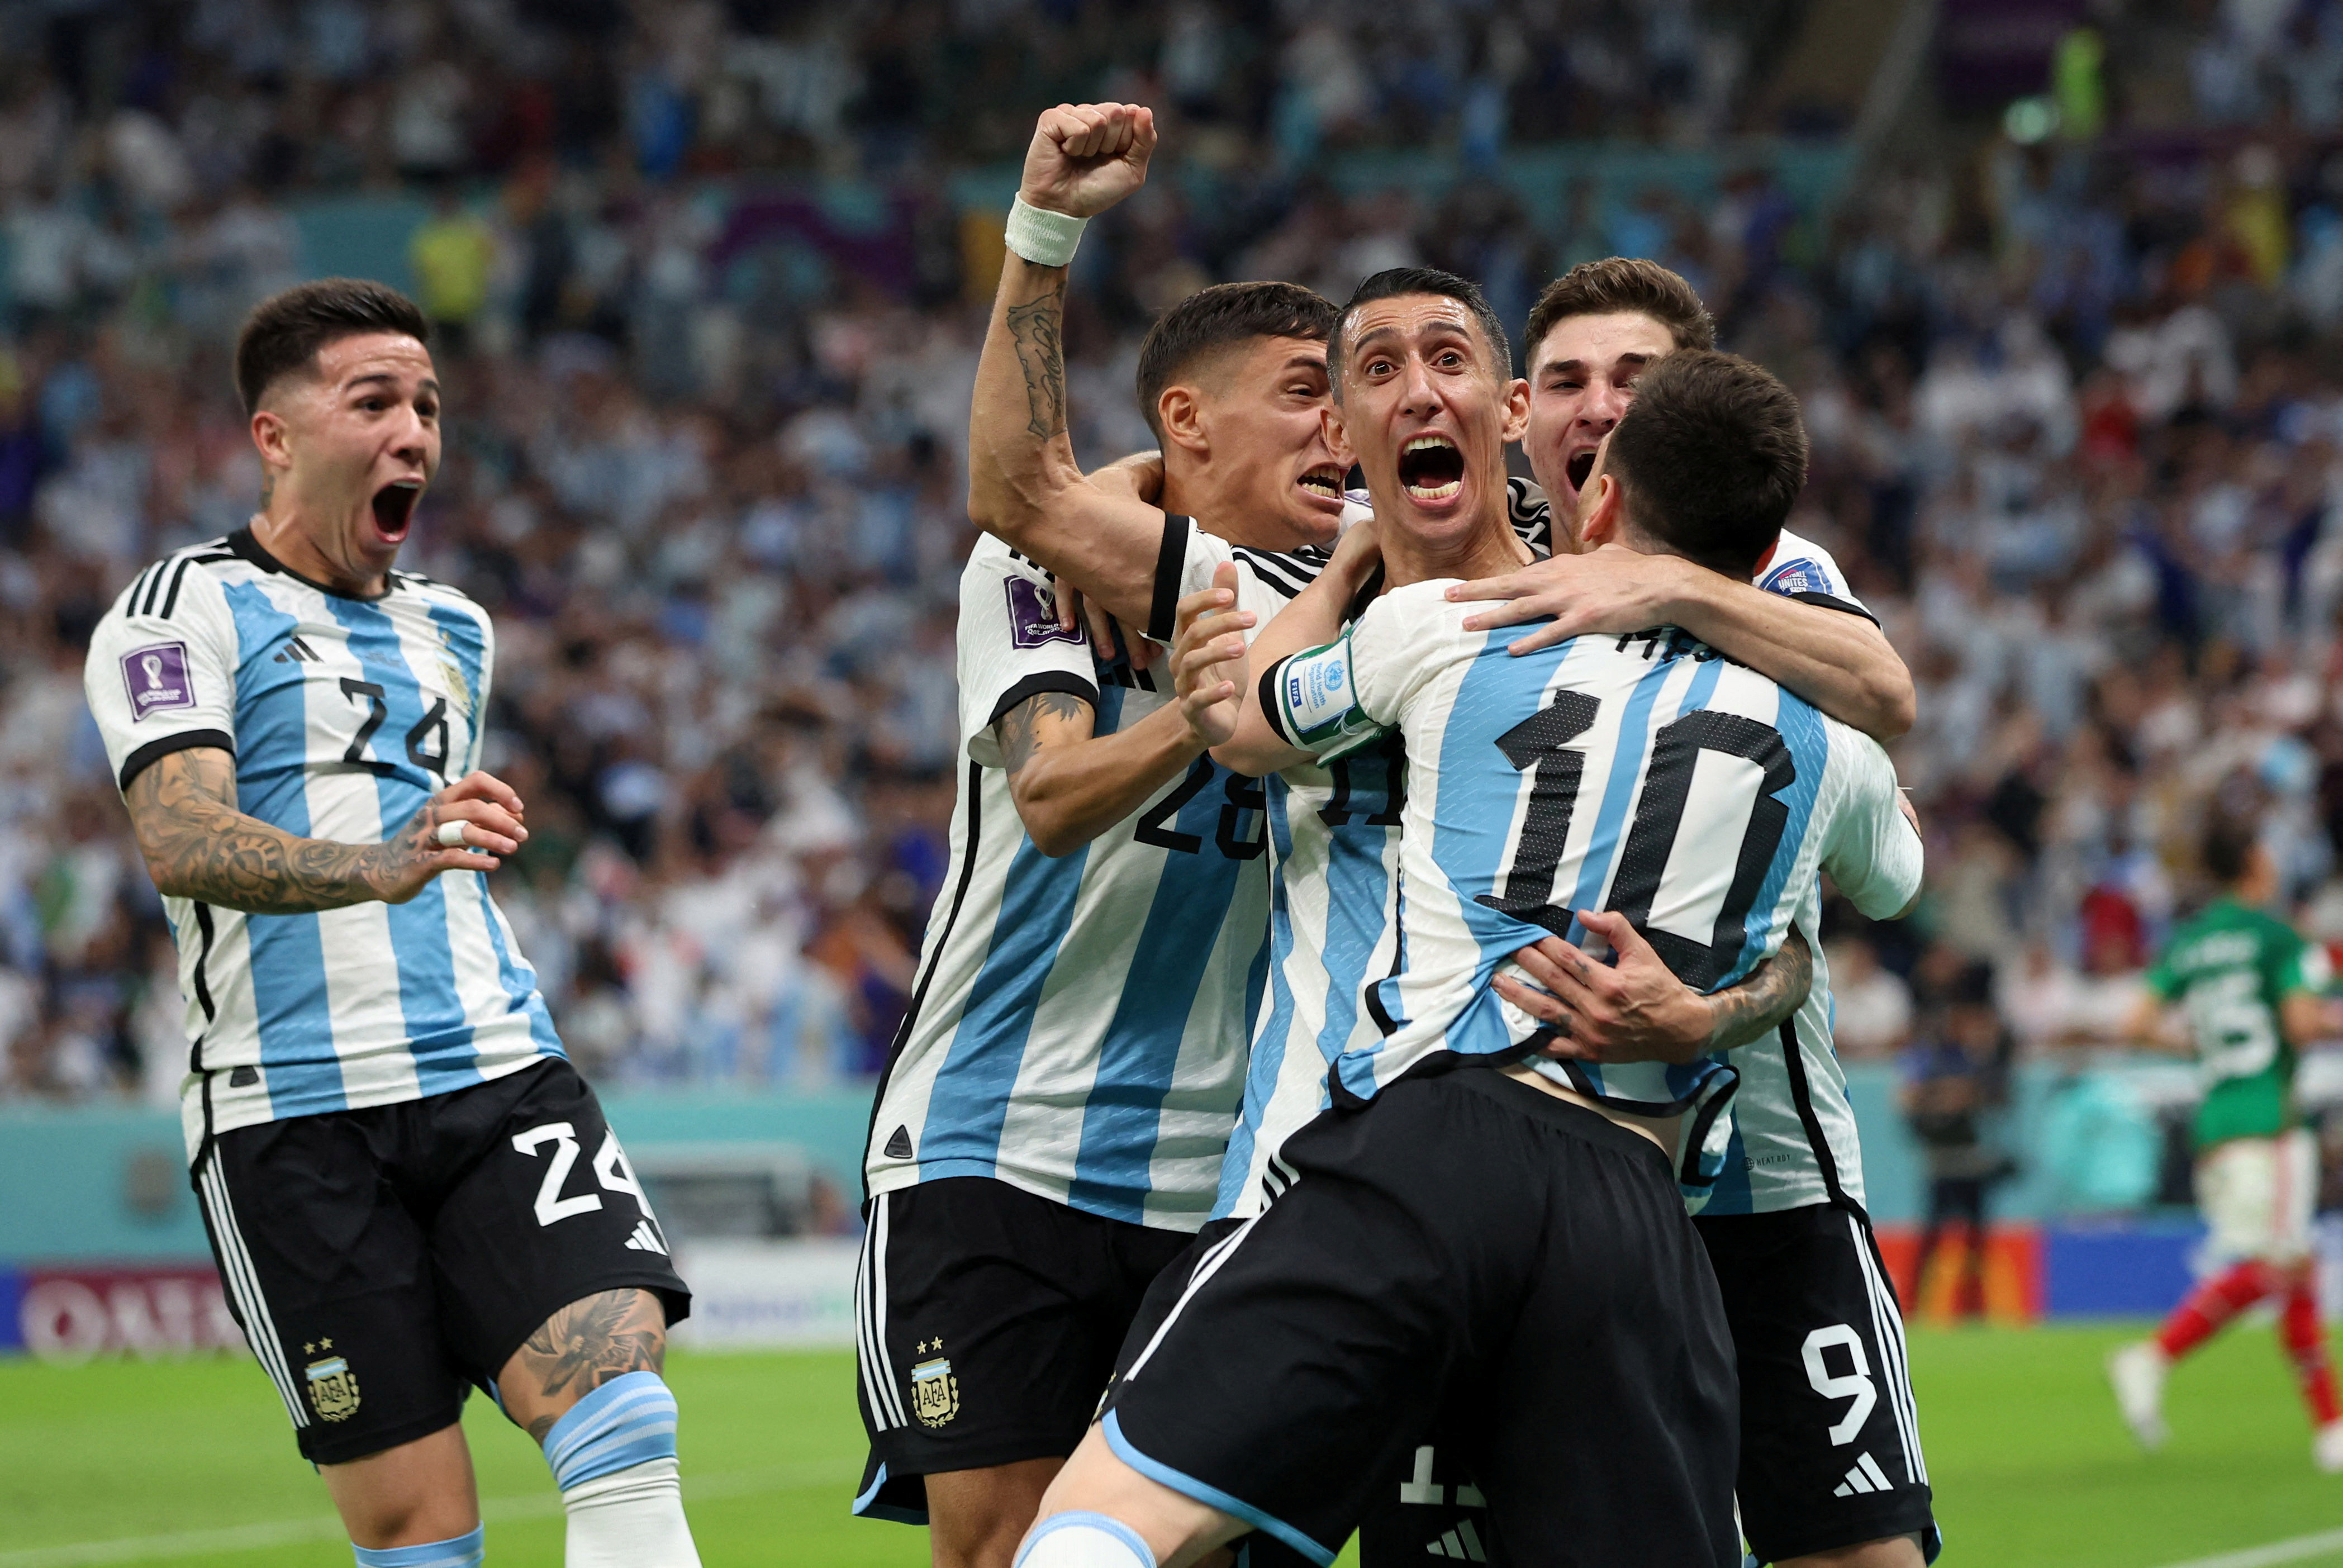 Soccer Football - FIFA World Cup Qatar 2022 - Group C - Argentina v Mexico - Lusail Stadium, Lusail, Qatar - November 26, 2022 Argentina's Lionel Messi celebrates scoring their first goal with Julian Alvarez, Angel Di Maria, Nahuel Molina and Enzo Fernandez REUTERS/Pedro Nunes     TPX IMAGES OF THE DAY